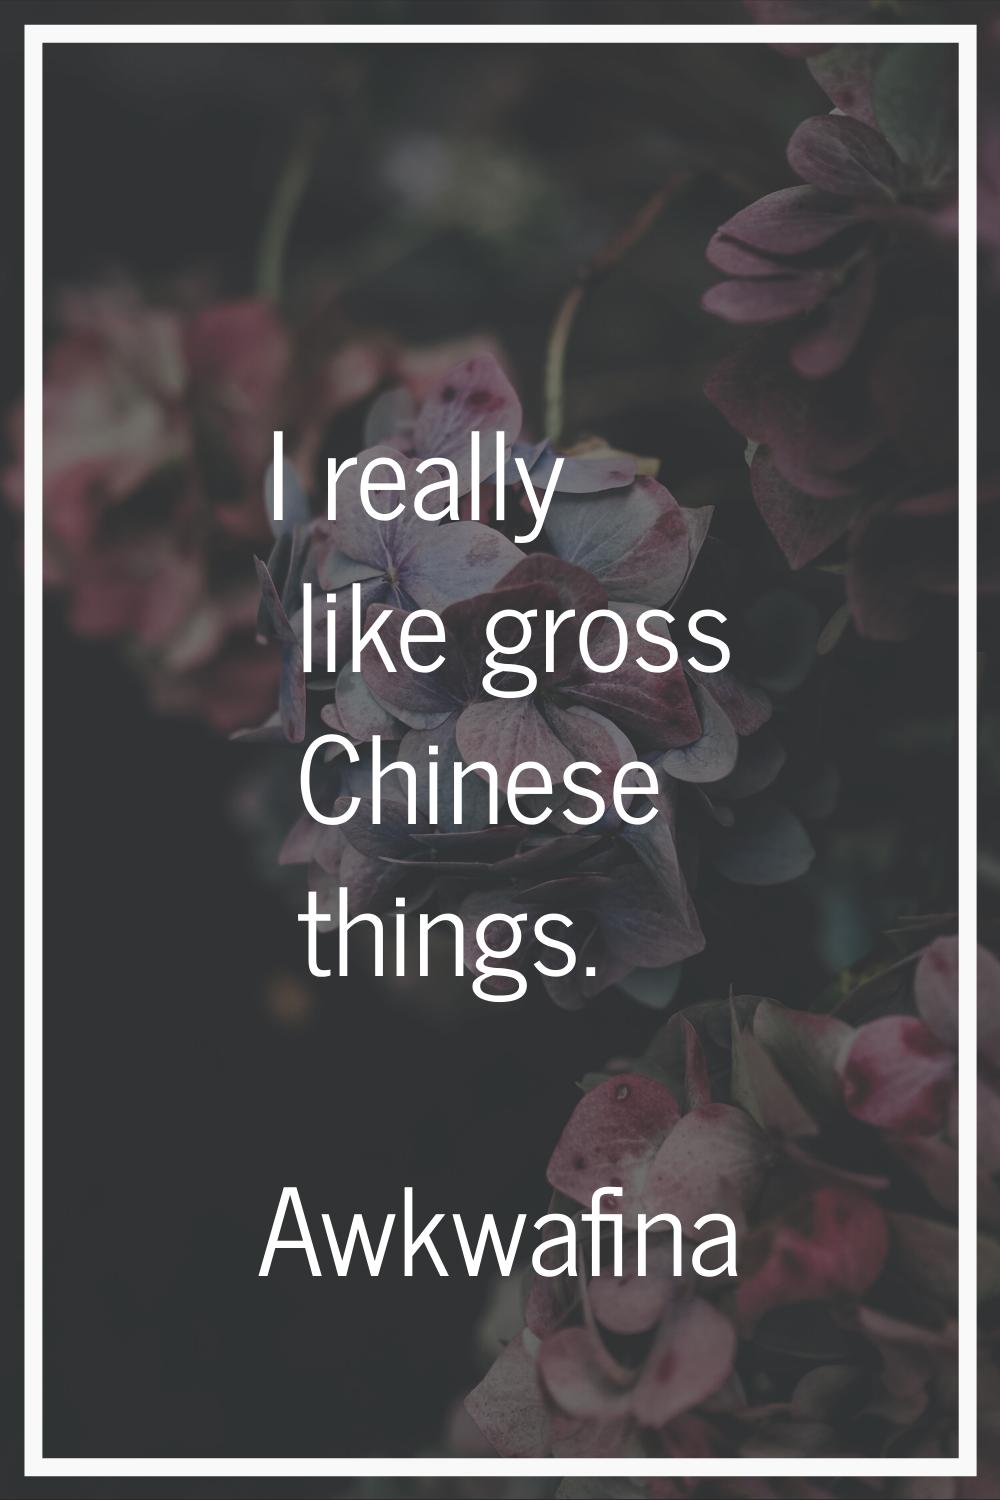 I really like gross Chinese things.